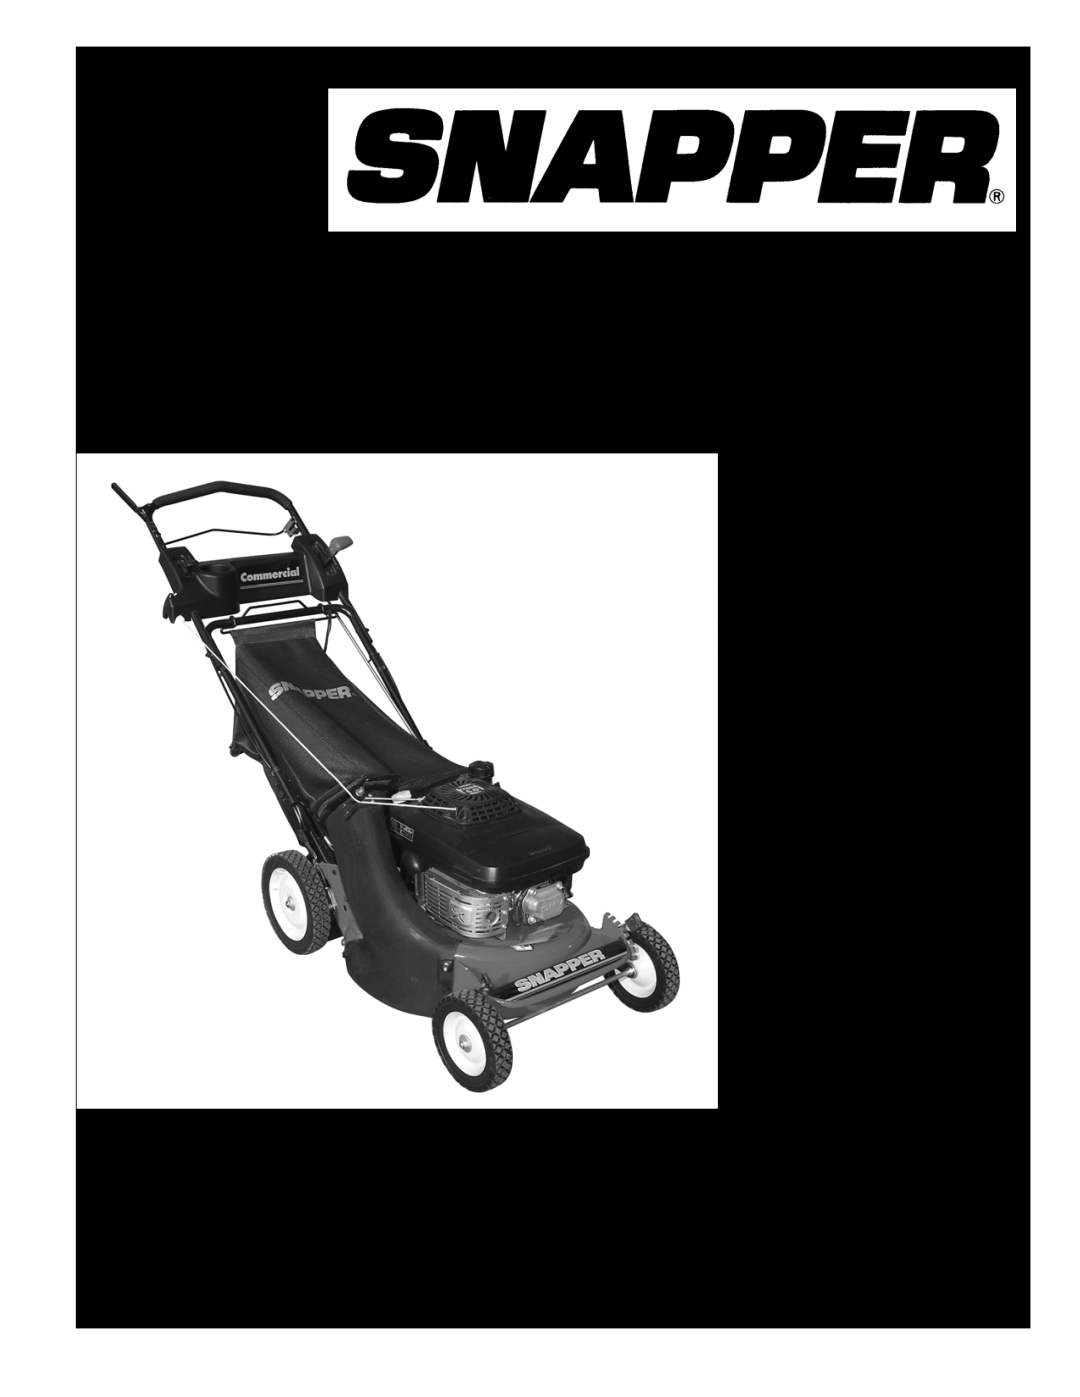 Briggs & Stratton 7800849 manual Reproduction, Steel Deck Walk Behind Commercial Mower Series, Parts Manual for, Manual No 